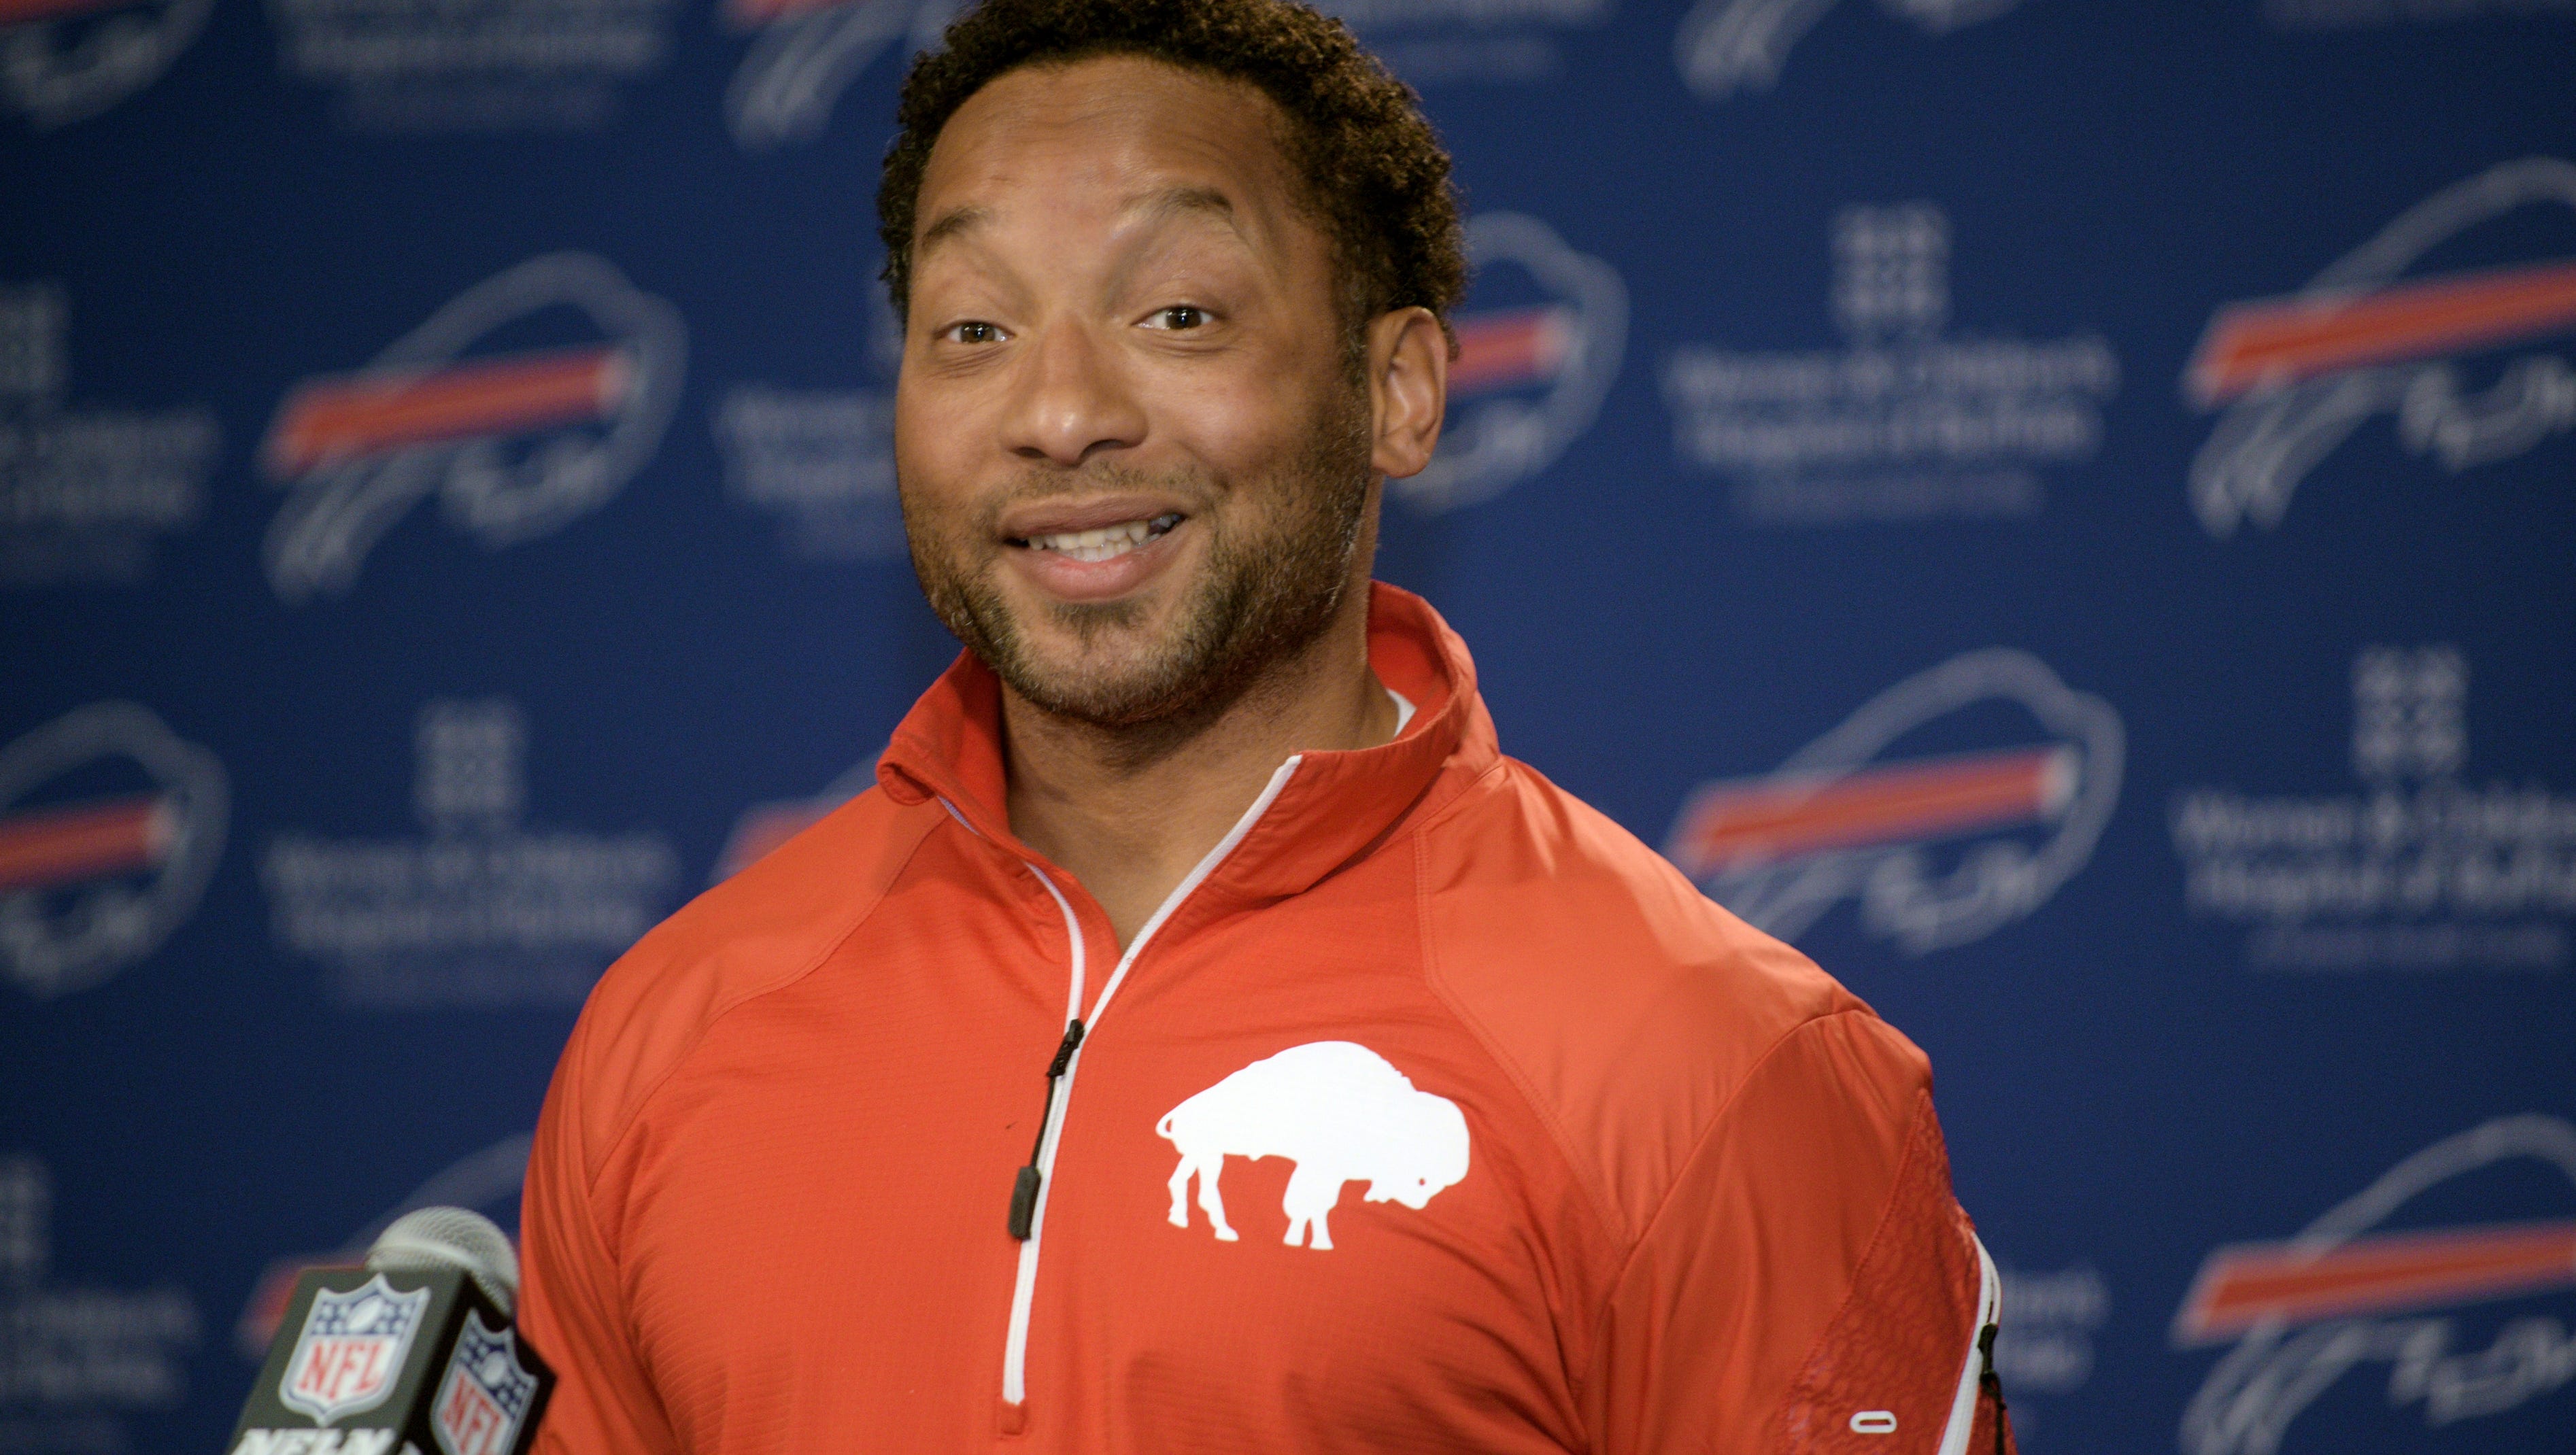 Former Buffalo Bills general manager Doug Whaley interviewed for the Packers' job.